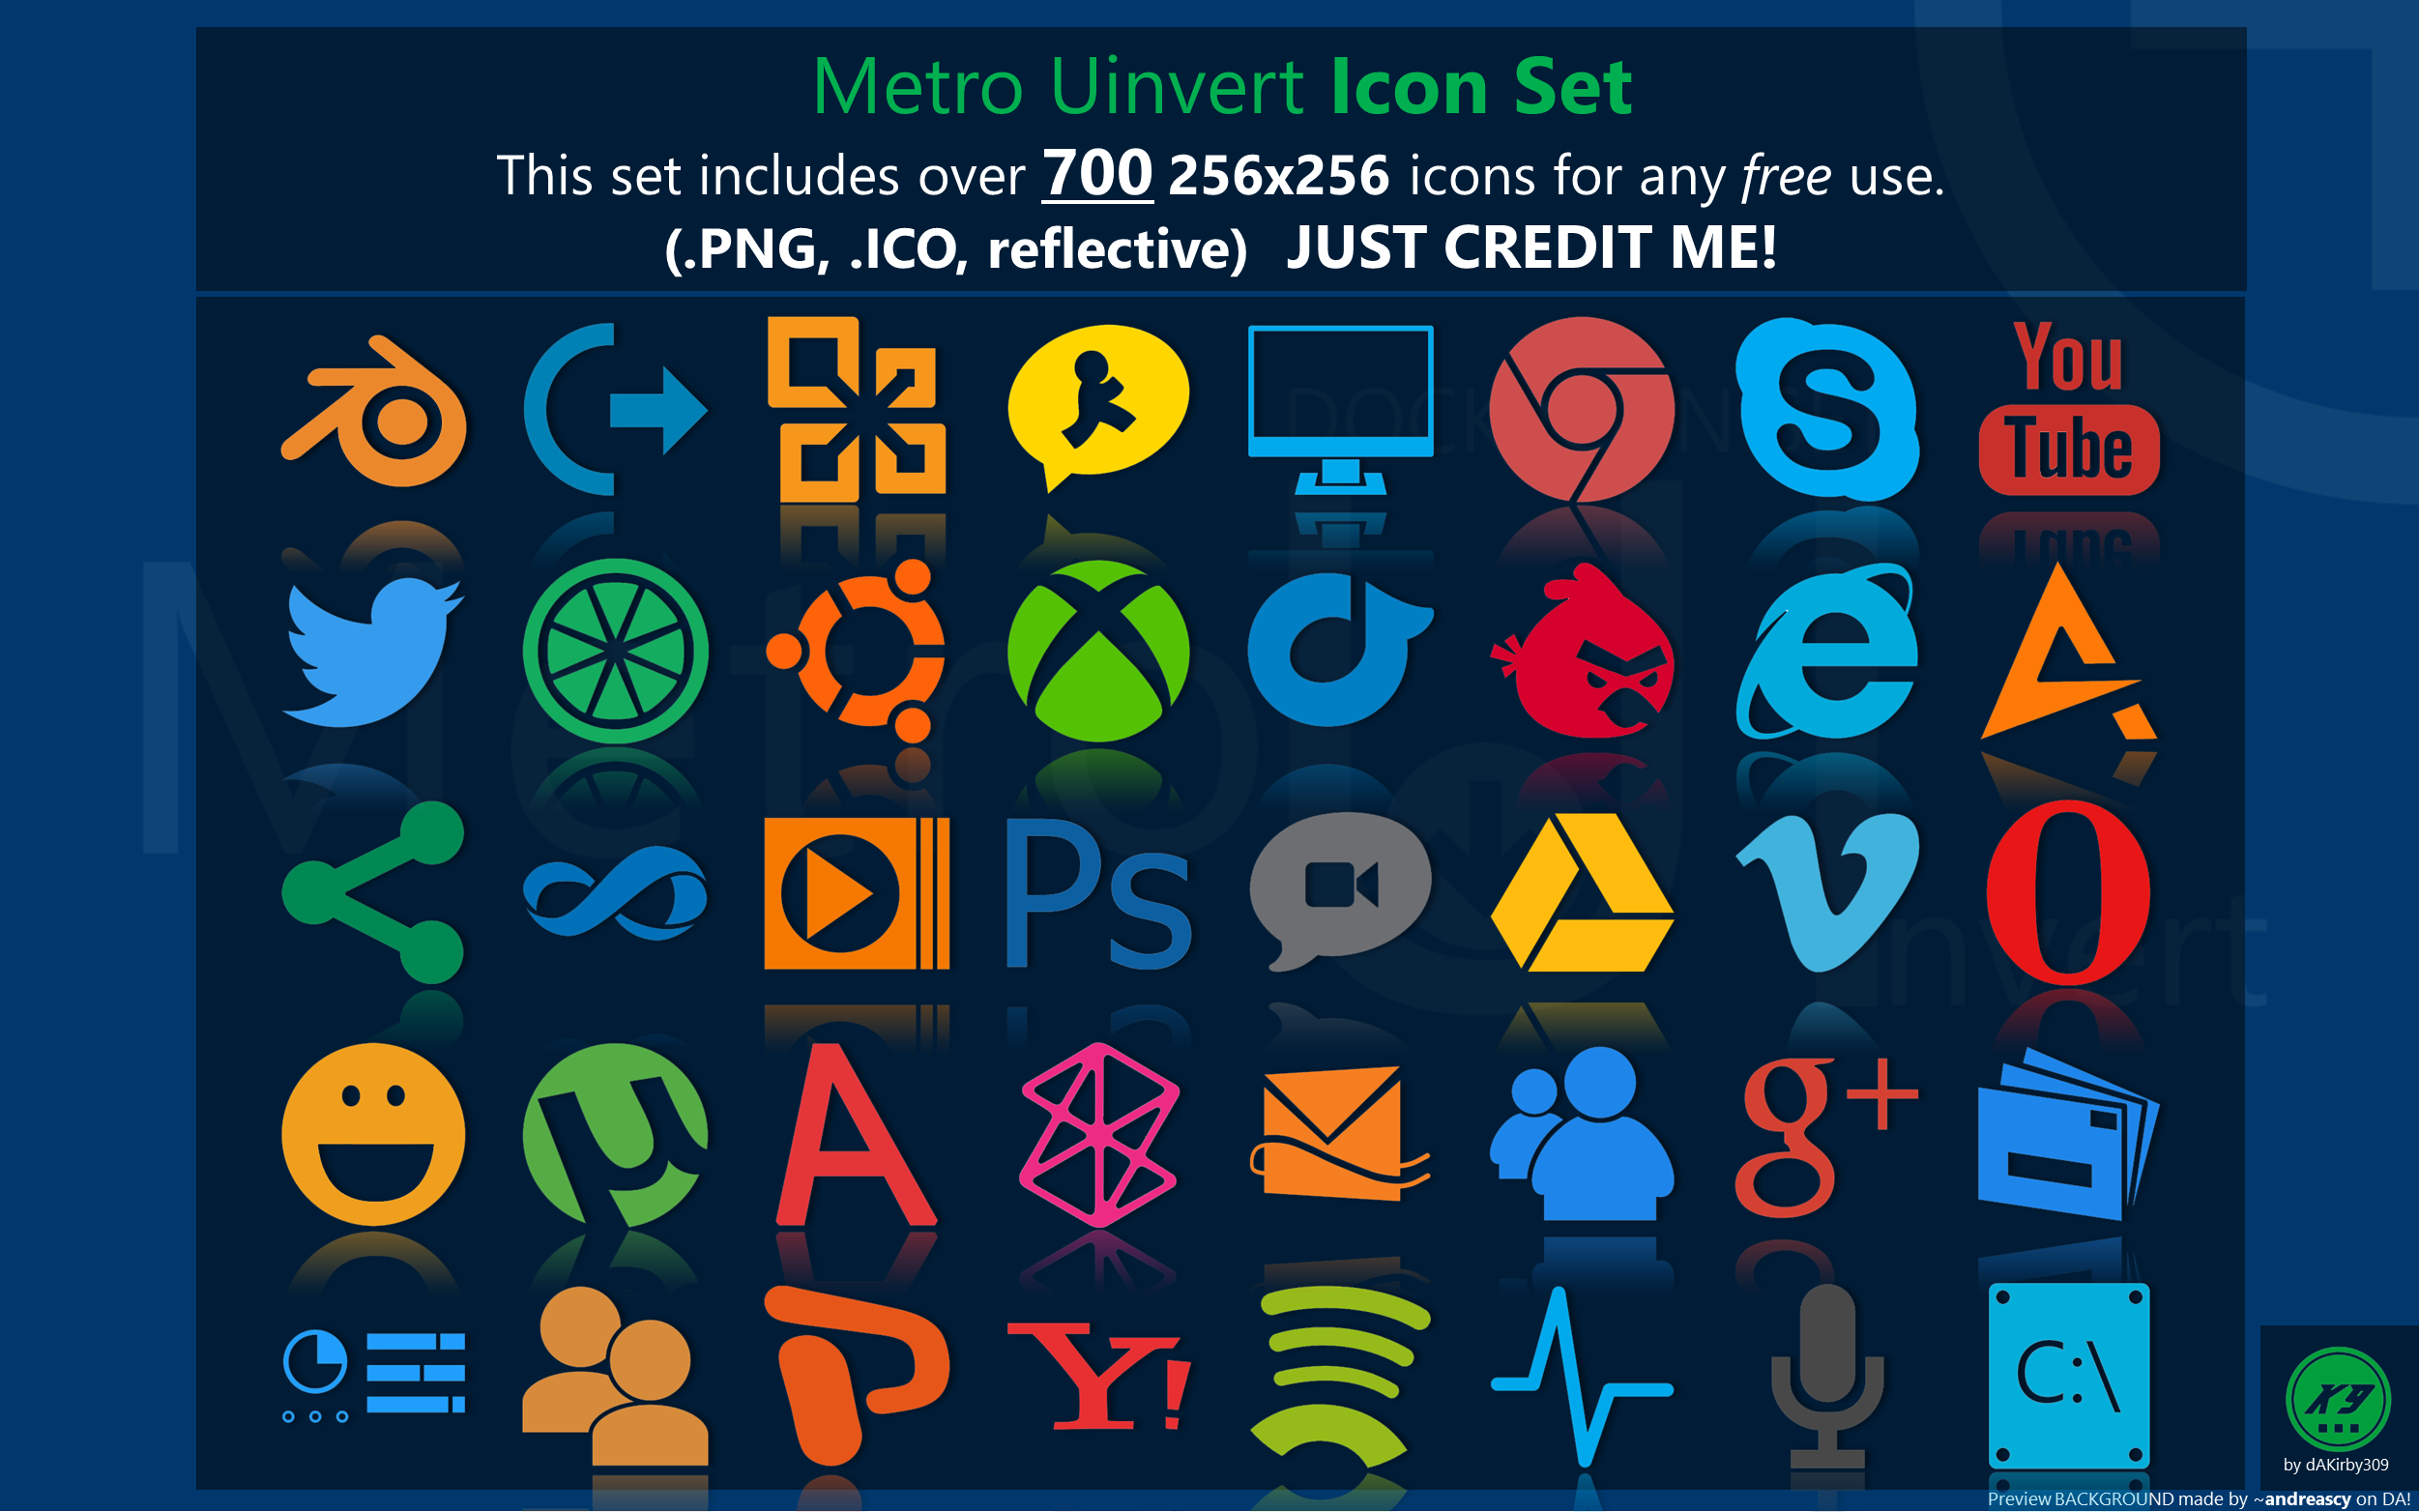 68,100 Free Icons (SVG, PNG)